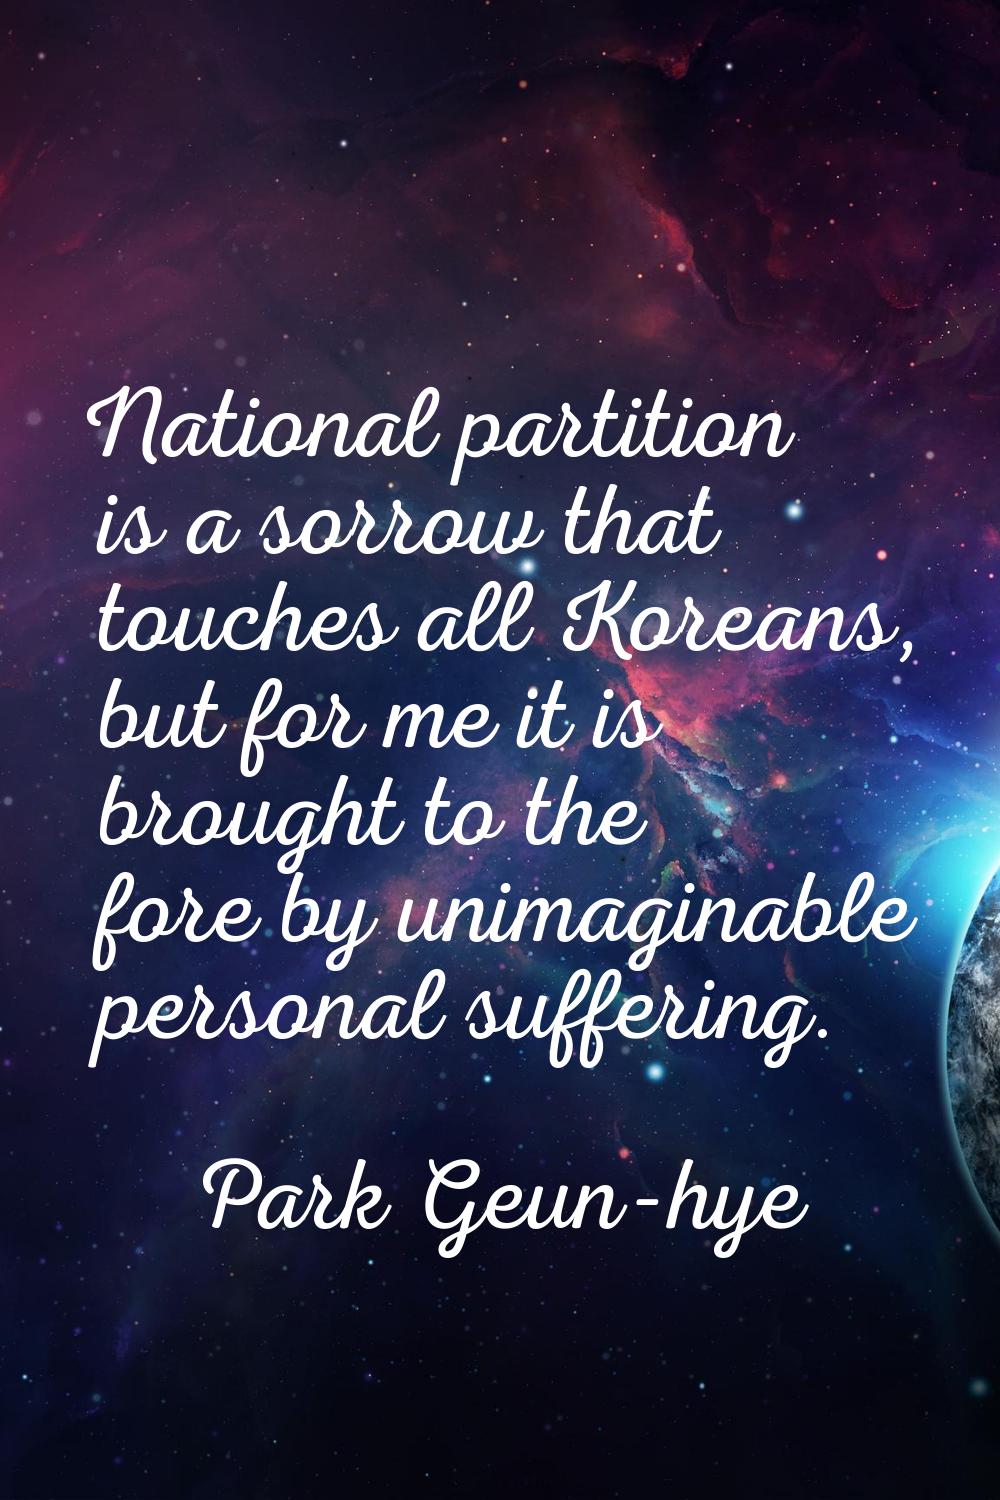 National partition is a sorrow that touches all Koreans, but for me it is brought to the fore by un